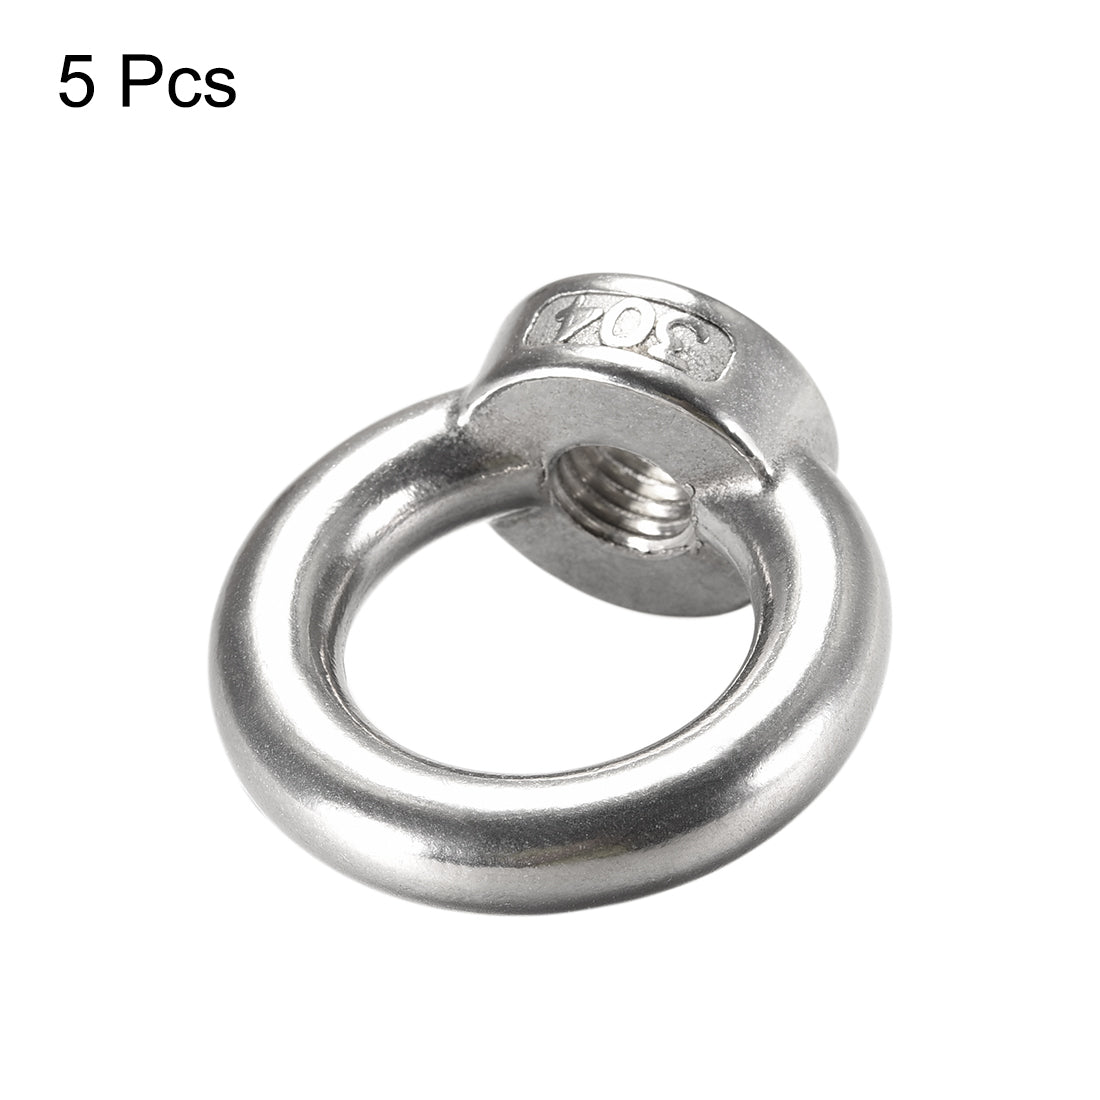 uxcell Uxcell M12 Female Thread 304 Stainless Steel Ring Shaped Lifting Eye Nut 5pcs